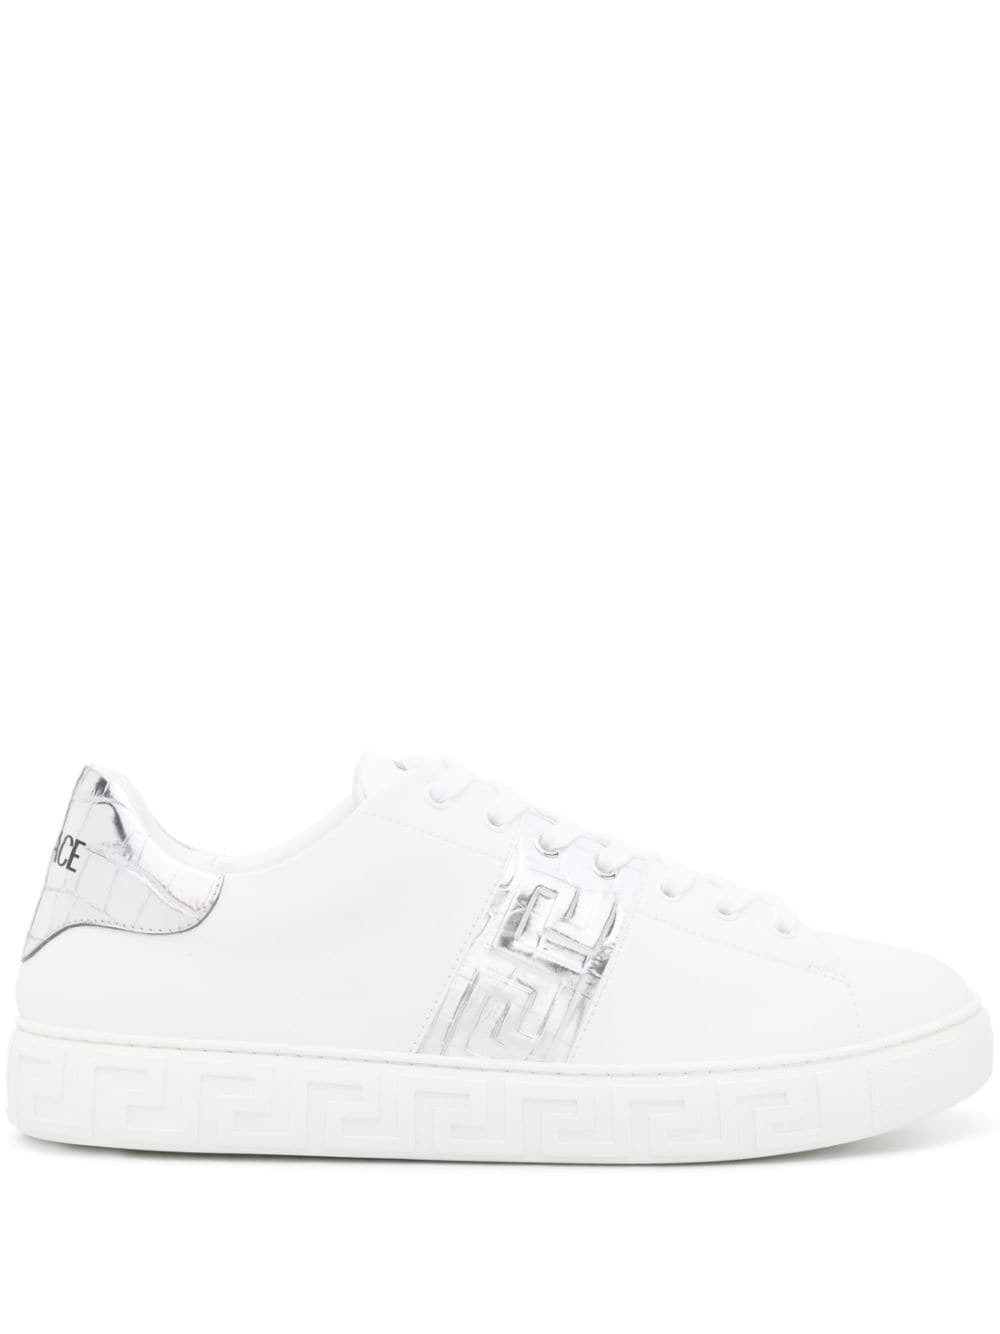 Greca-detail leather sneakers - 1